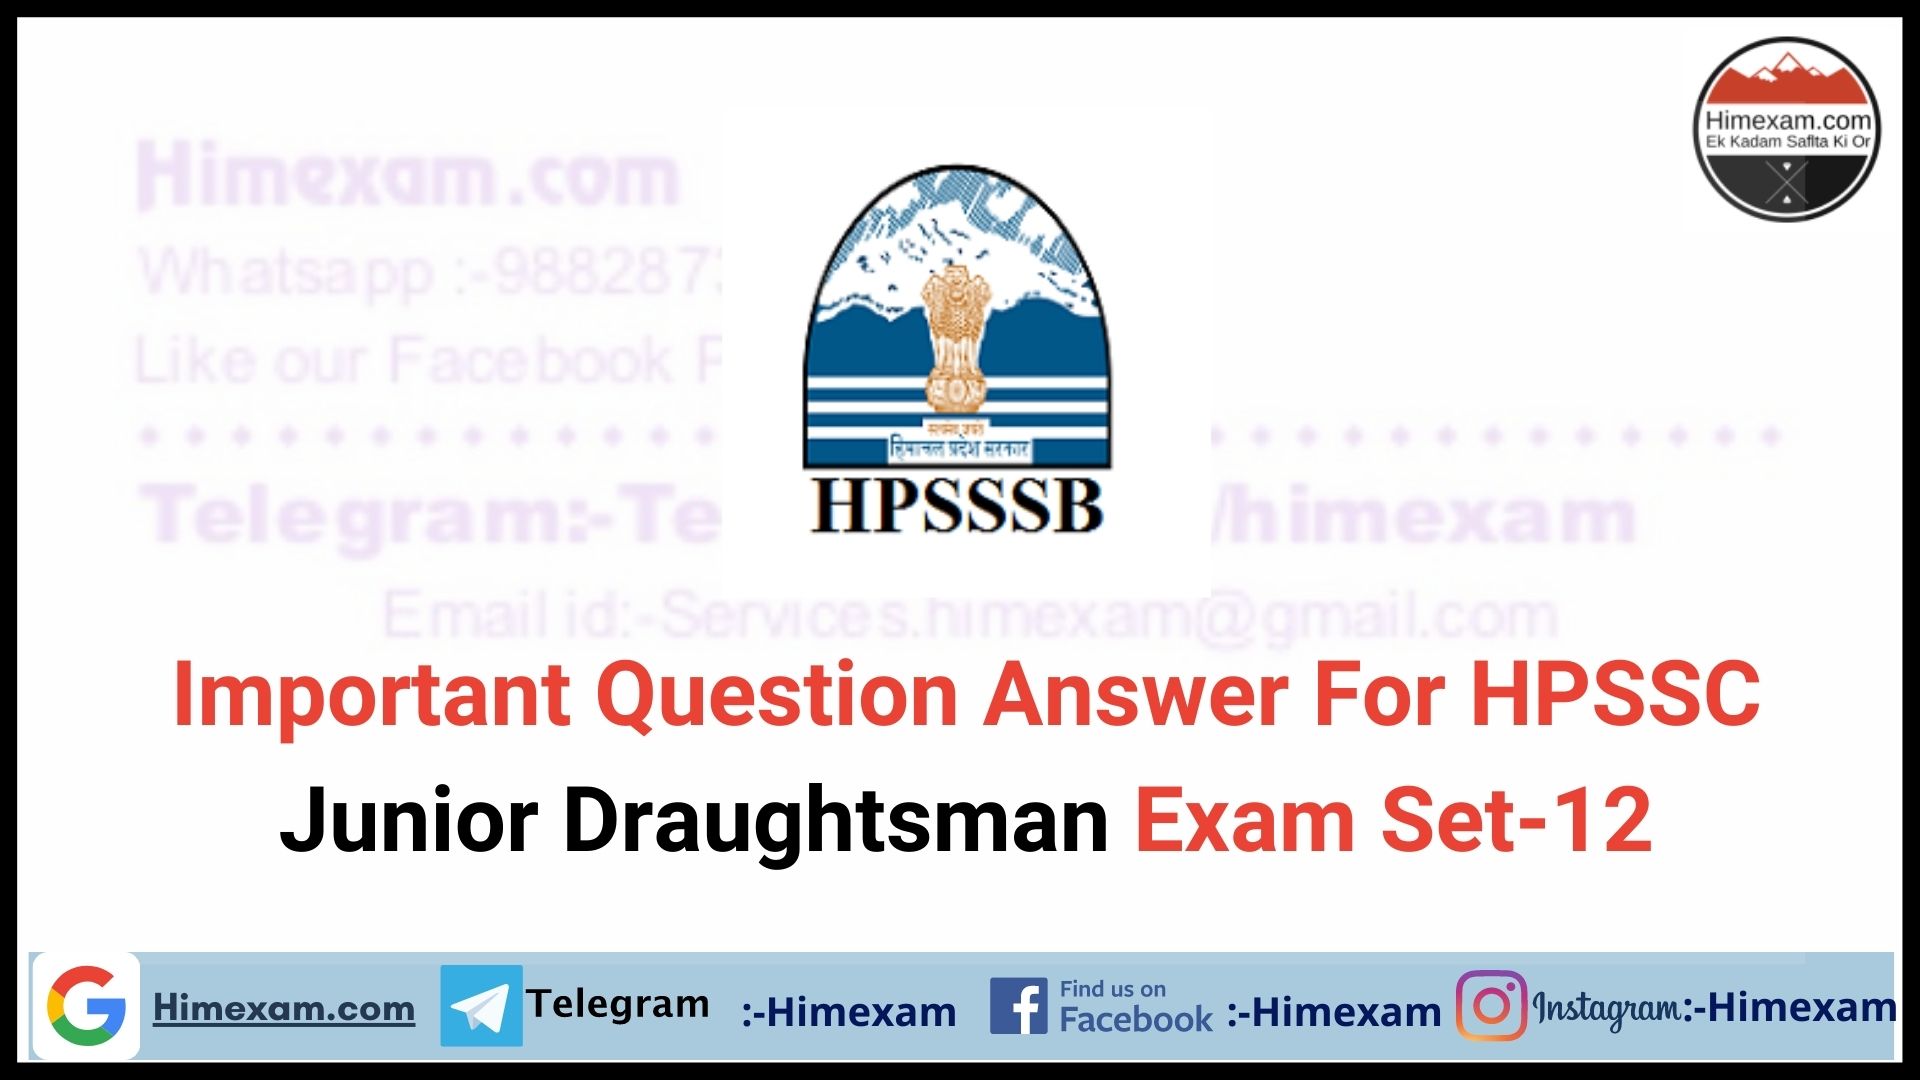 Important Question Answer For HPSSC Junior Draughtsman Exam Set-12